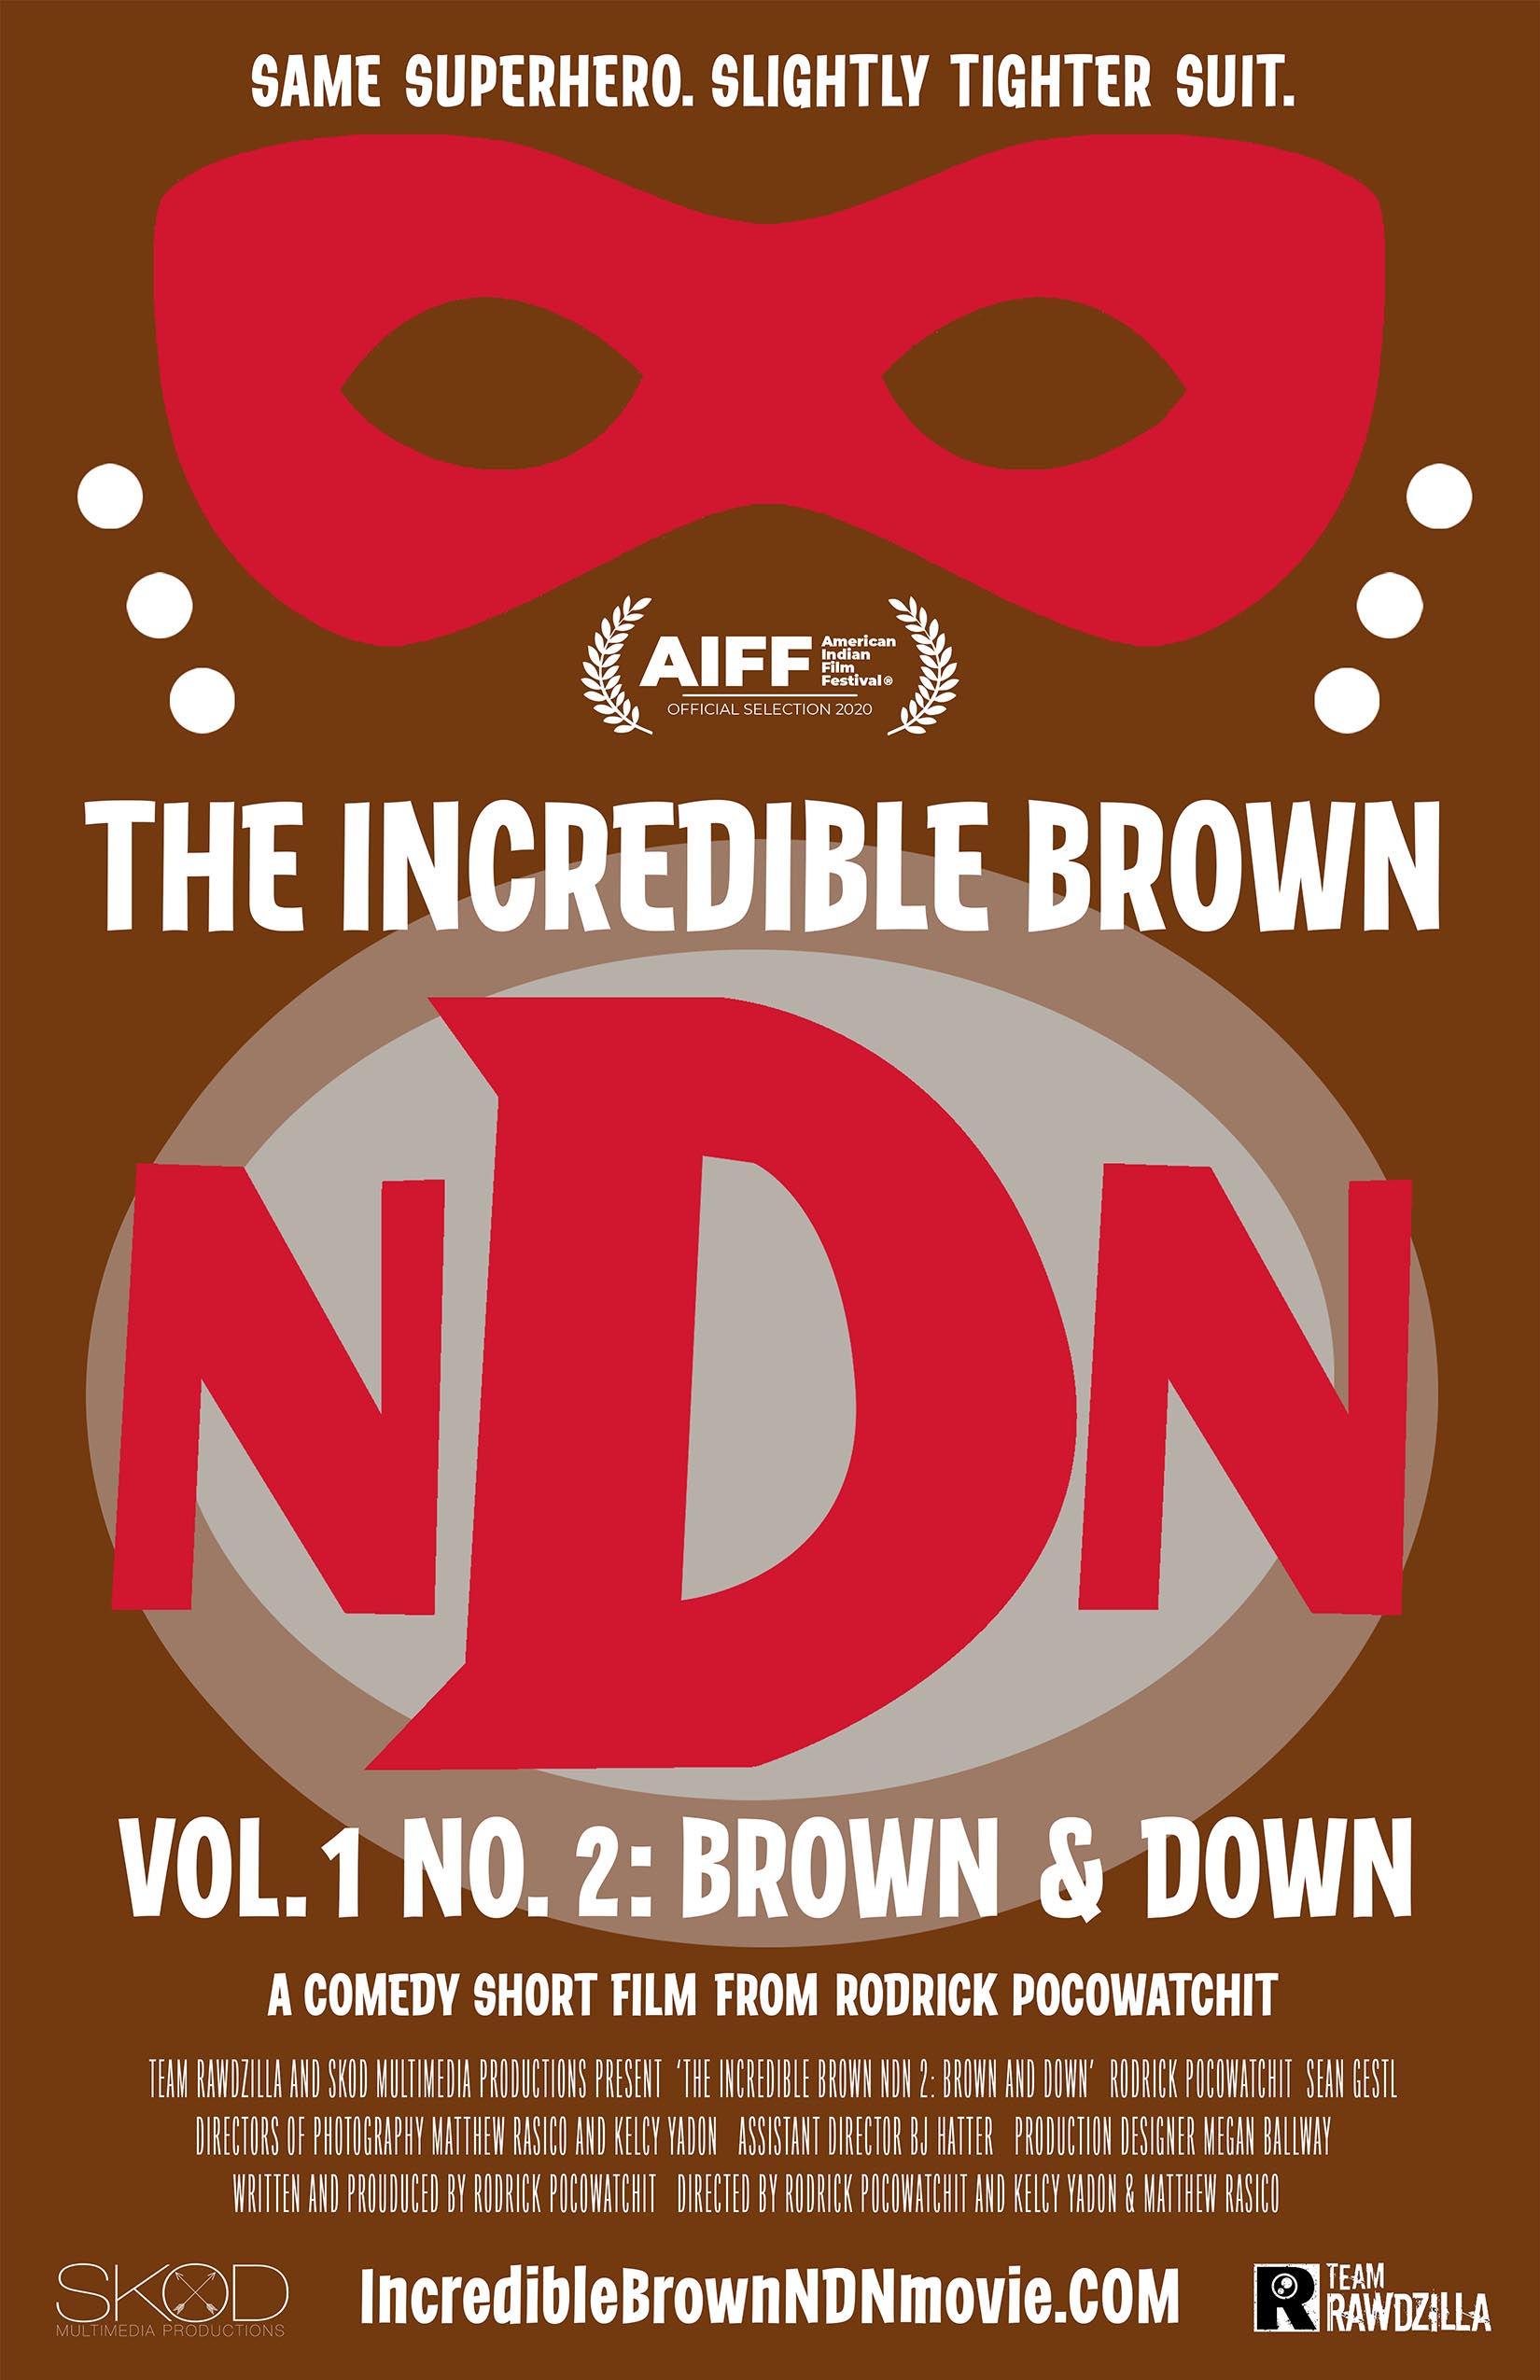 The Incredible Brown NDN 2: Brown and Down (2020)